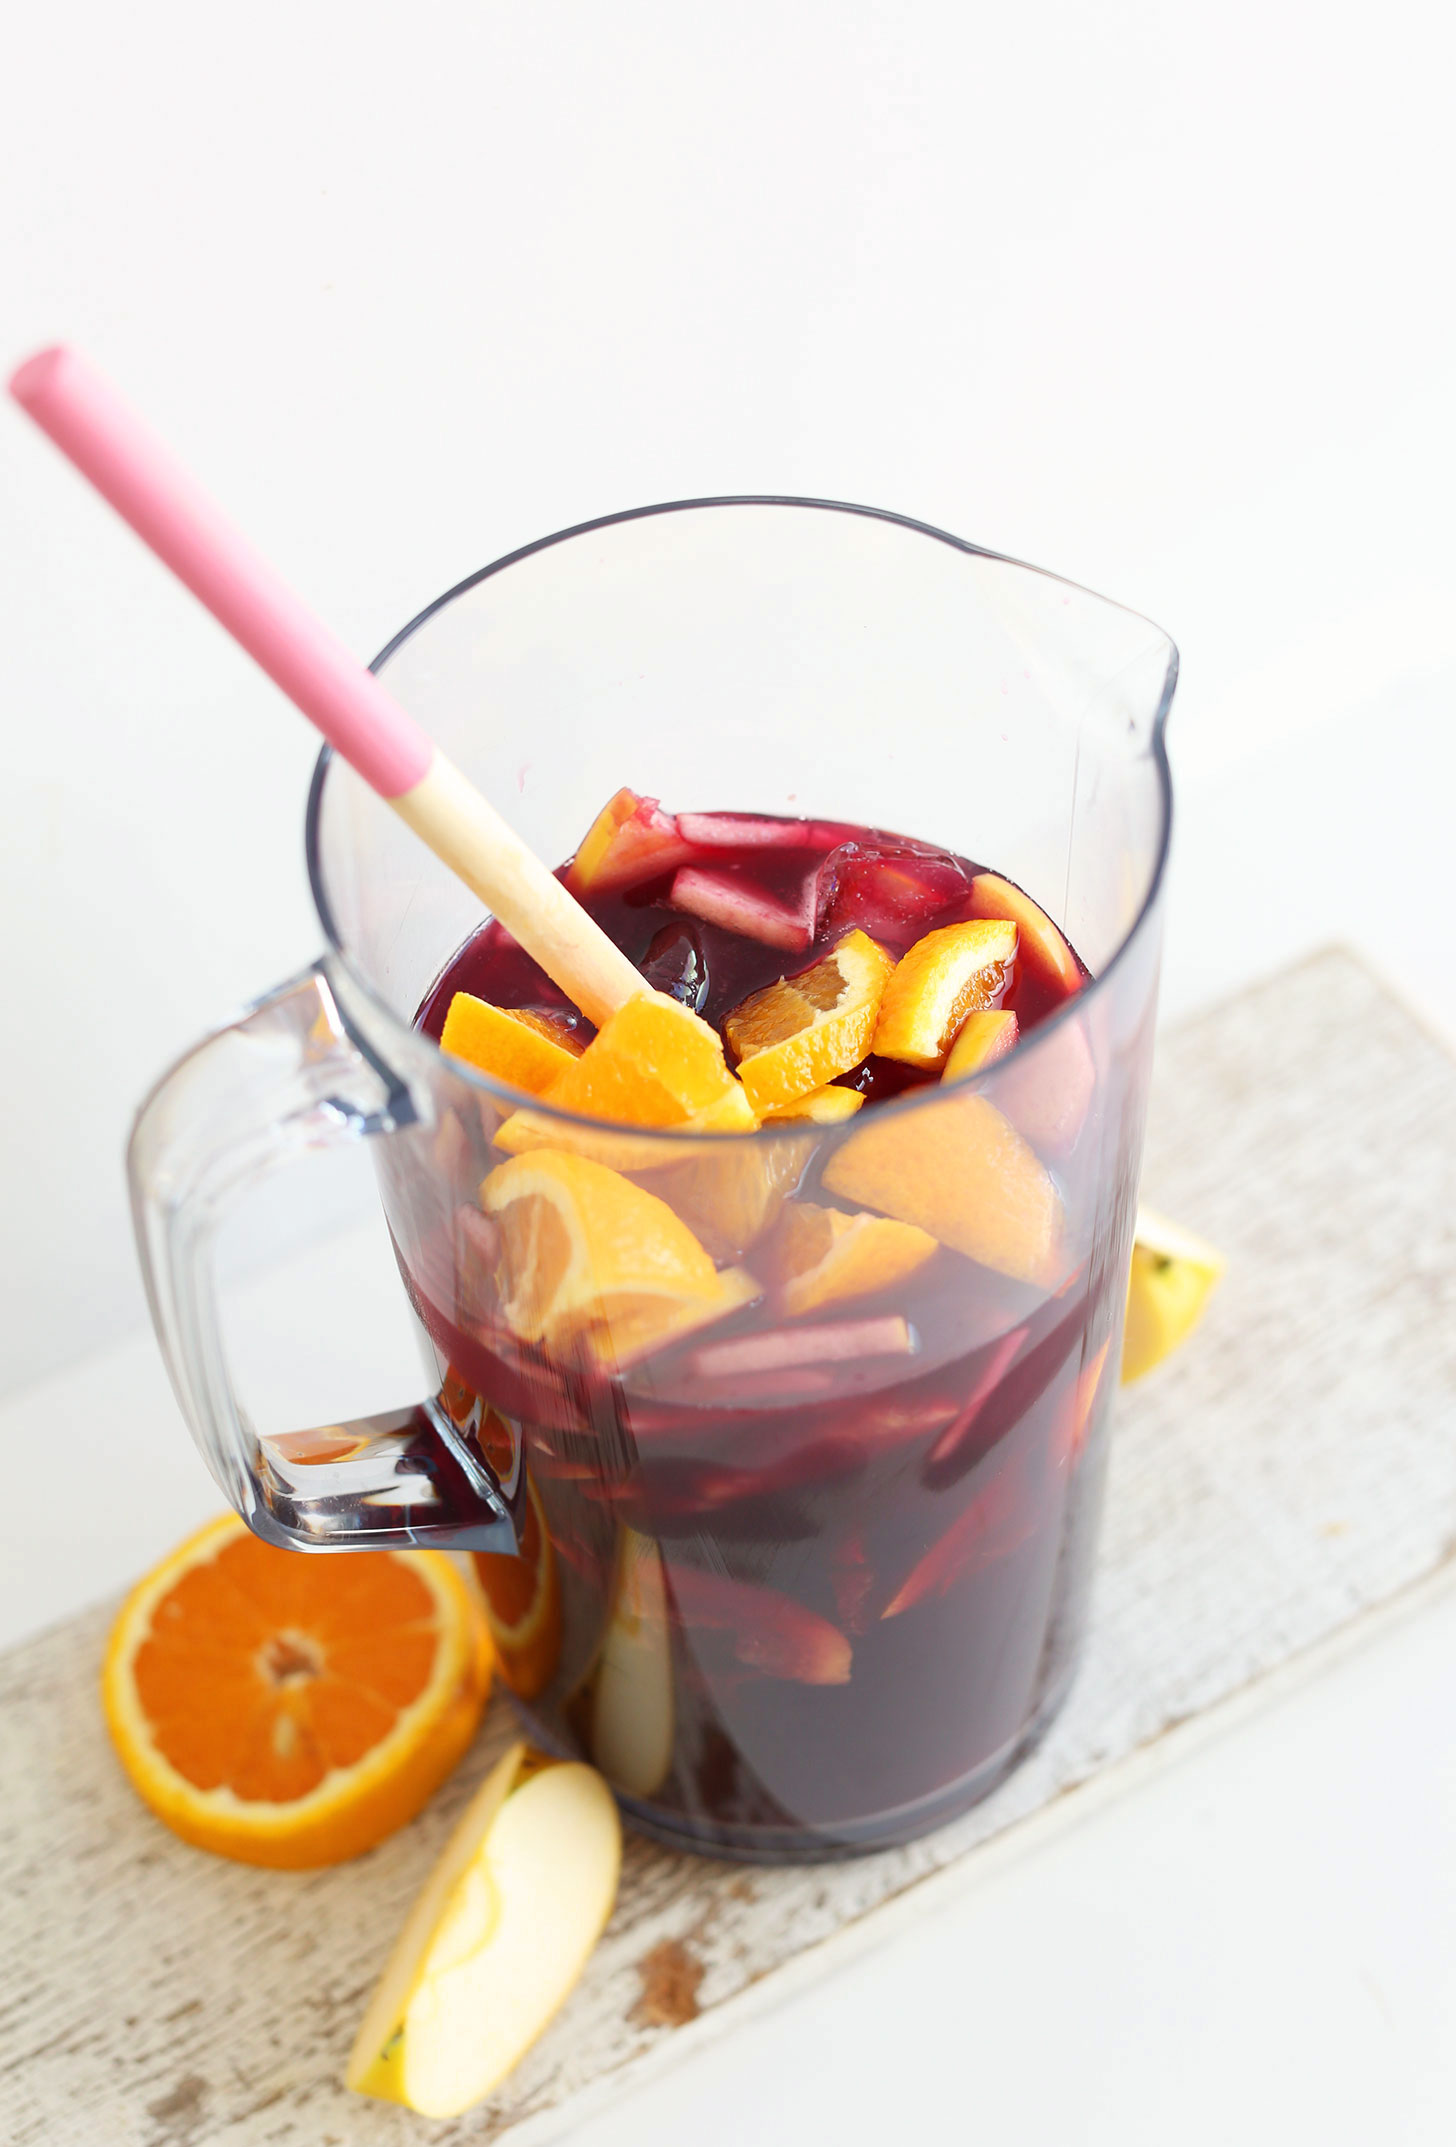 Garnishing Traditional Red Sangria with orange slices